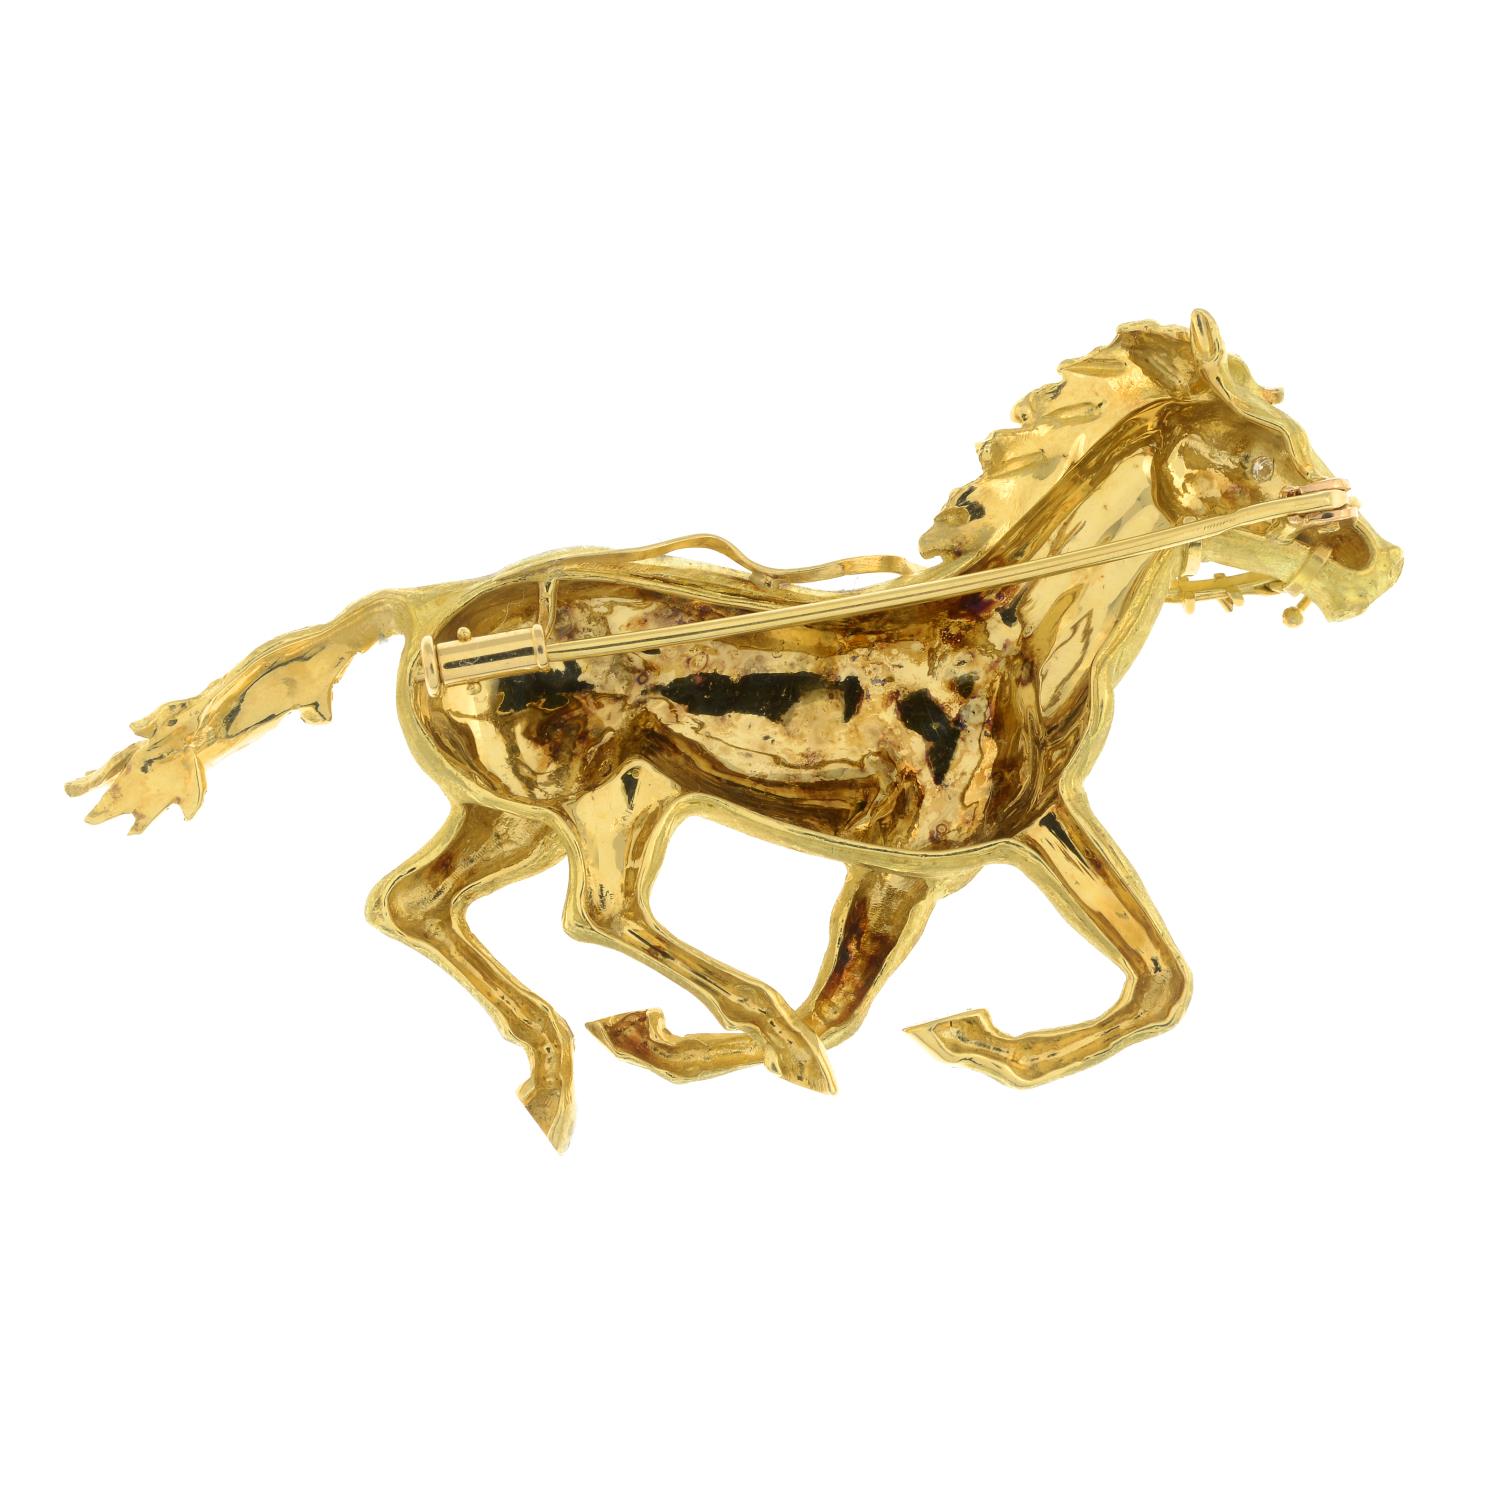 An 18ct gold galloping horse brooch, with diamond accent eye.French assay marks.Length 7.2cms. - Image 2 of 2